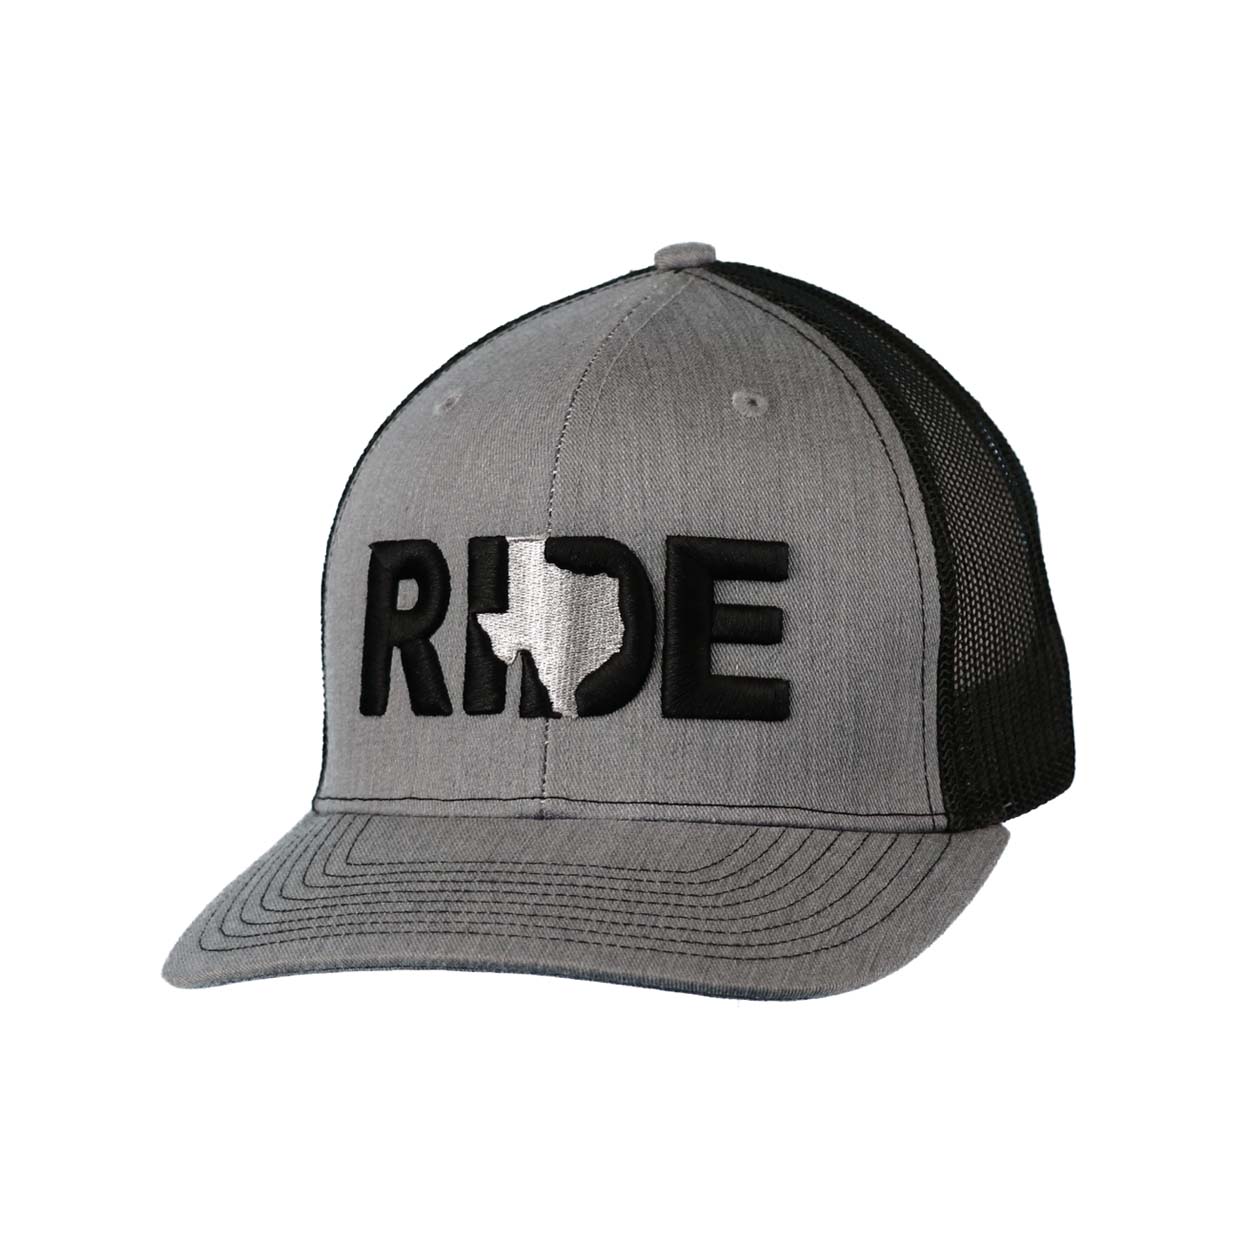 Ride Texas Classic Pro 3D Puff Embroidered Snapback Trucker Hat Heather Gray/Black